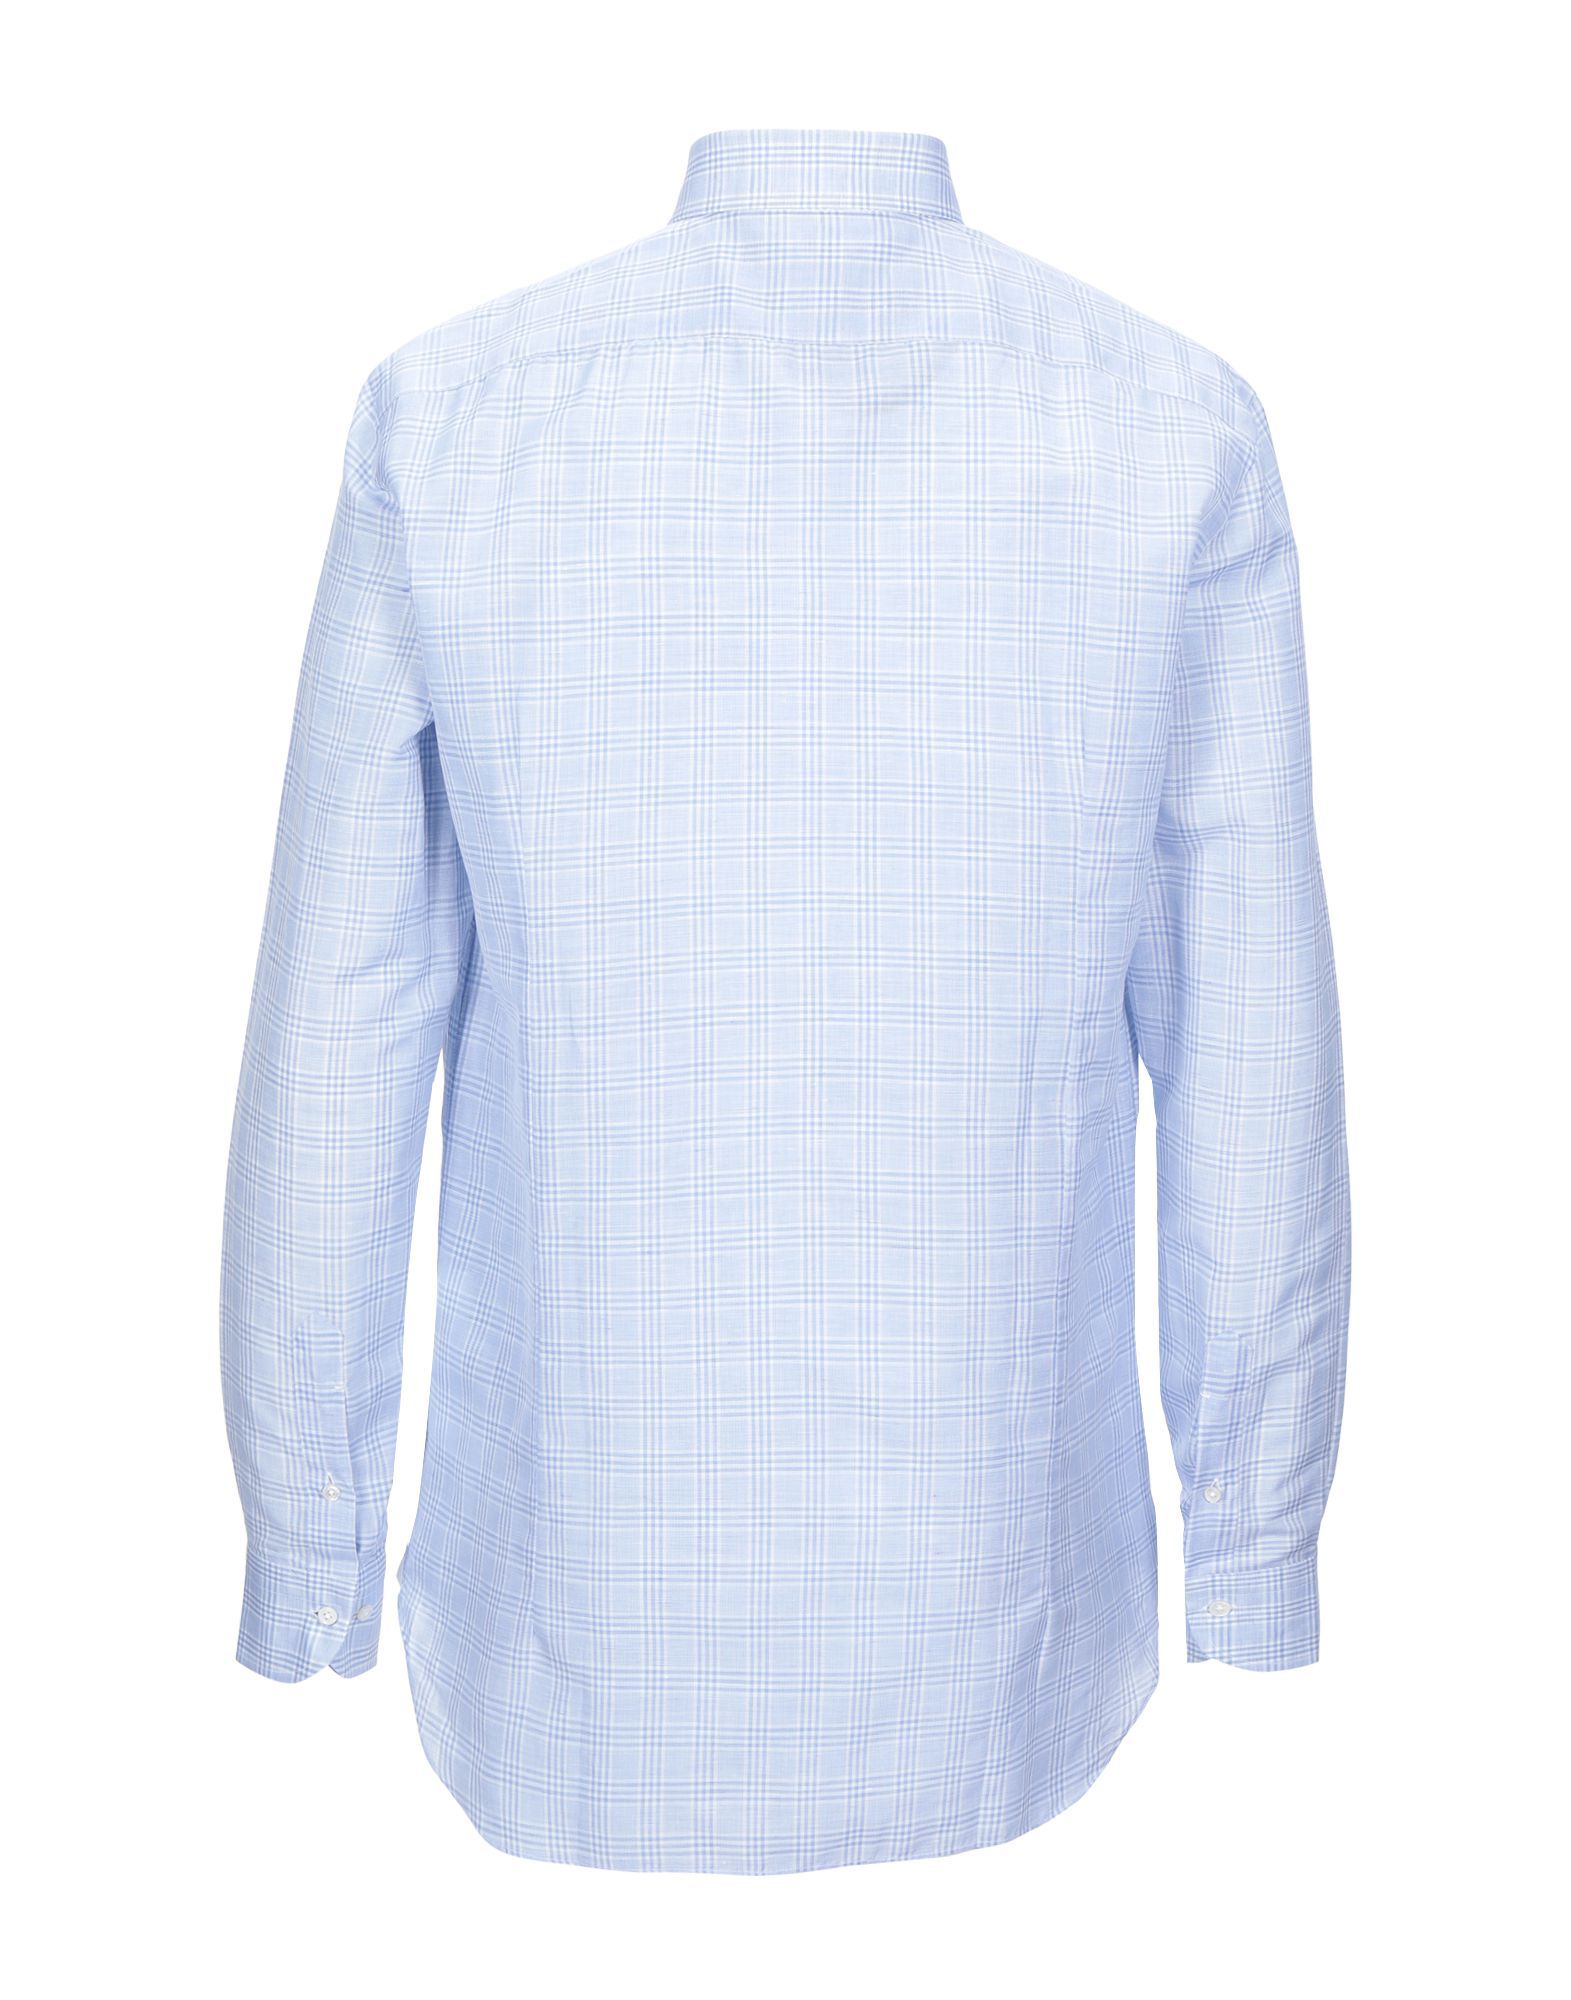 plain weave, no appliqués, checked, front closure, button closing, long sleeves, buttoned cuffs, classic neckline, no pockets, large sized